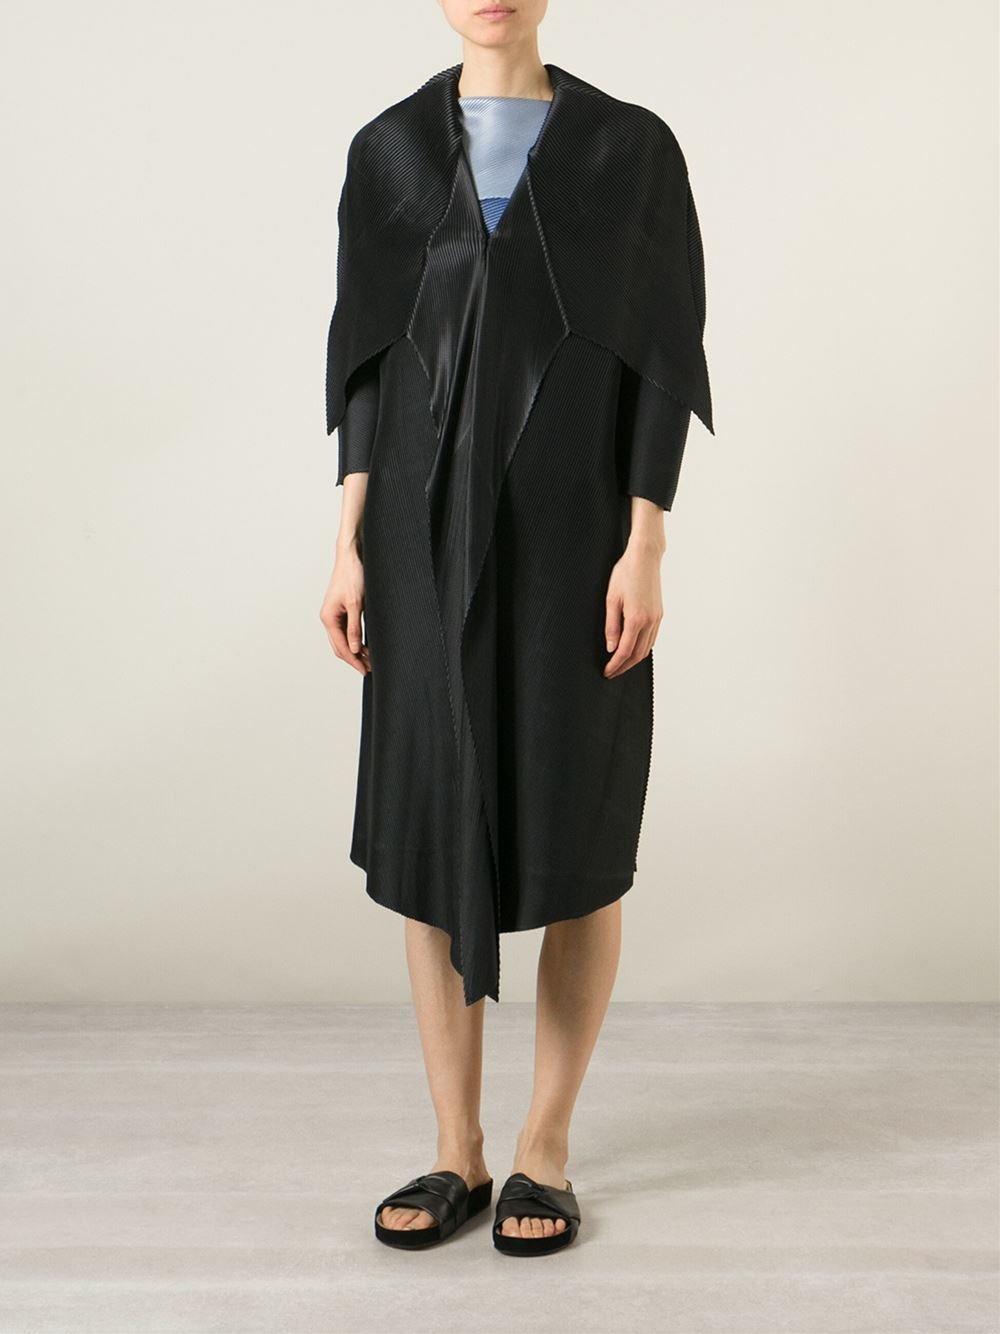 Issey miyake Draped Front Pleated Coat in Black | Lyst